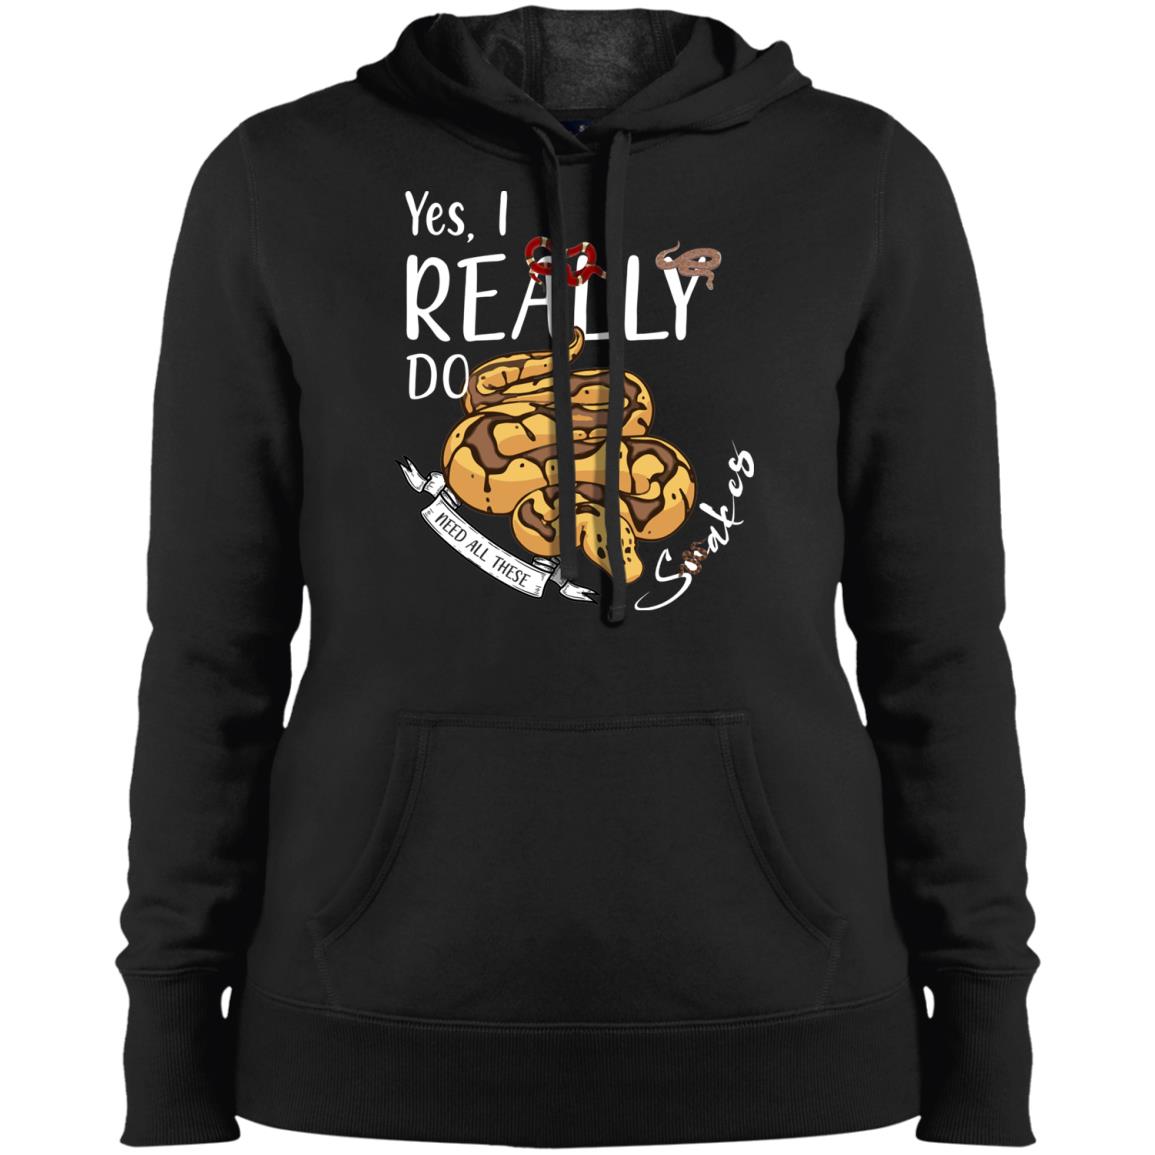 Yes, I Really Do Need All These Snakes - Womens Pullover Hooded Sweatshirt